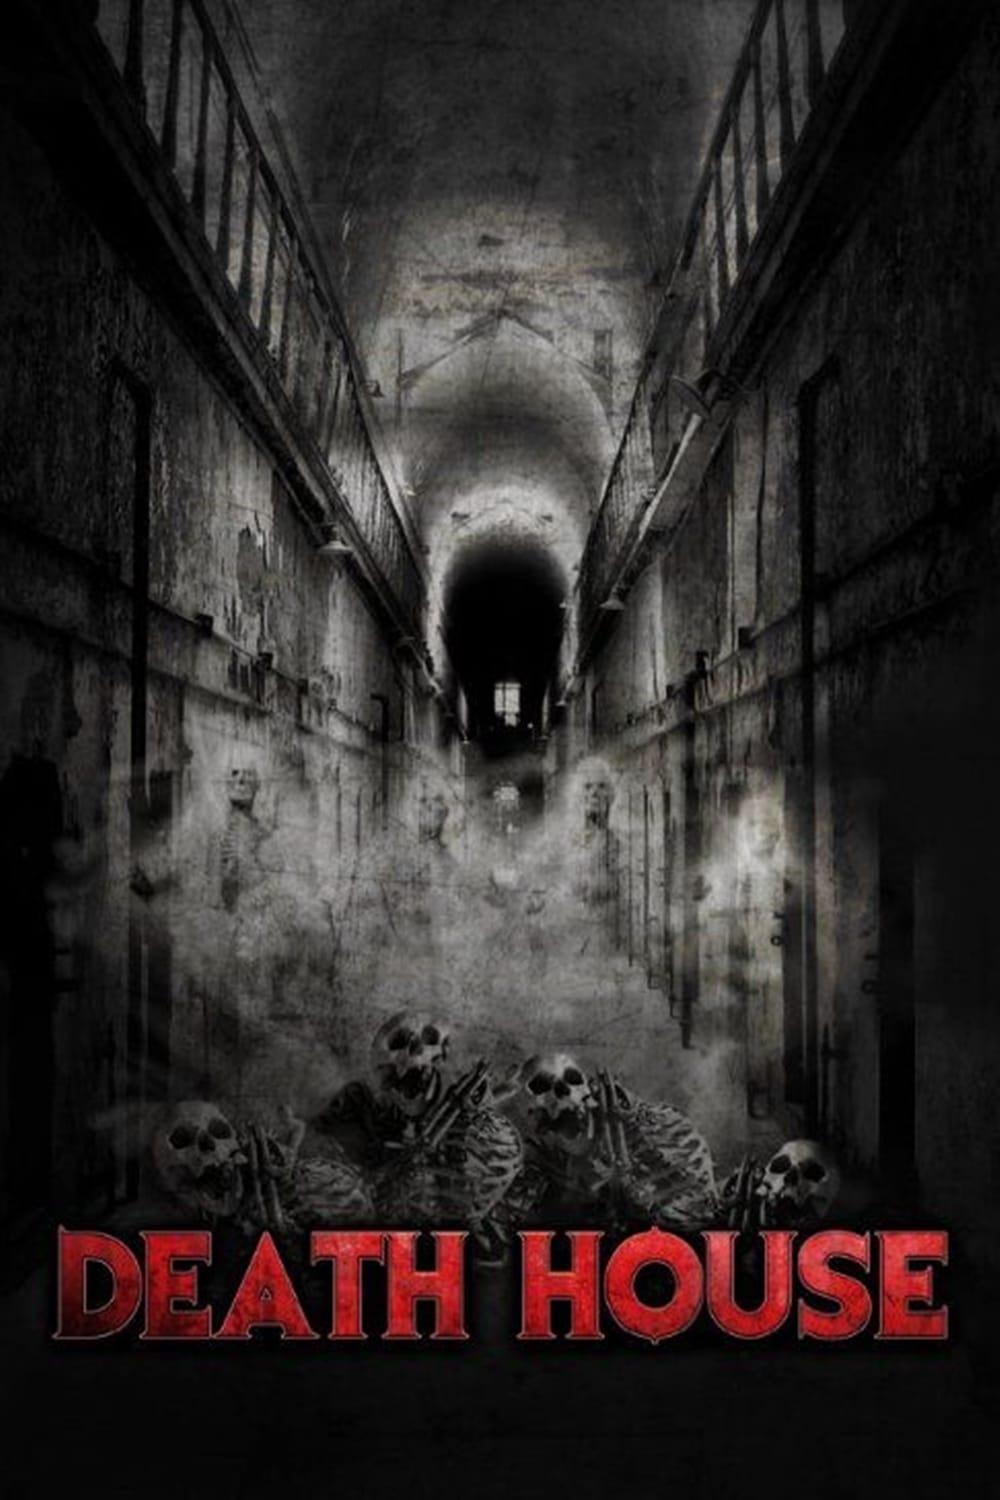 Death House poster